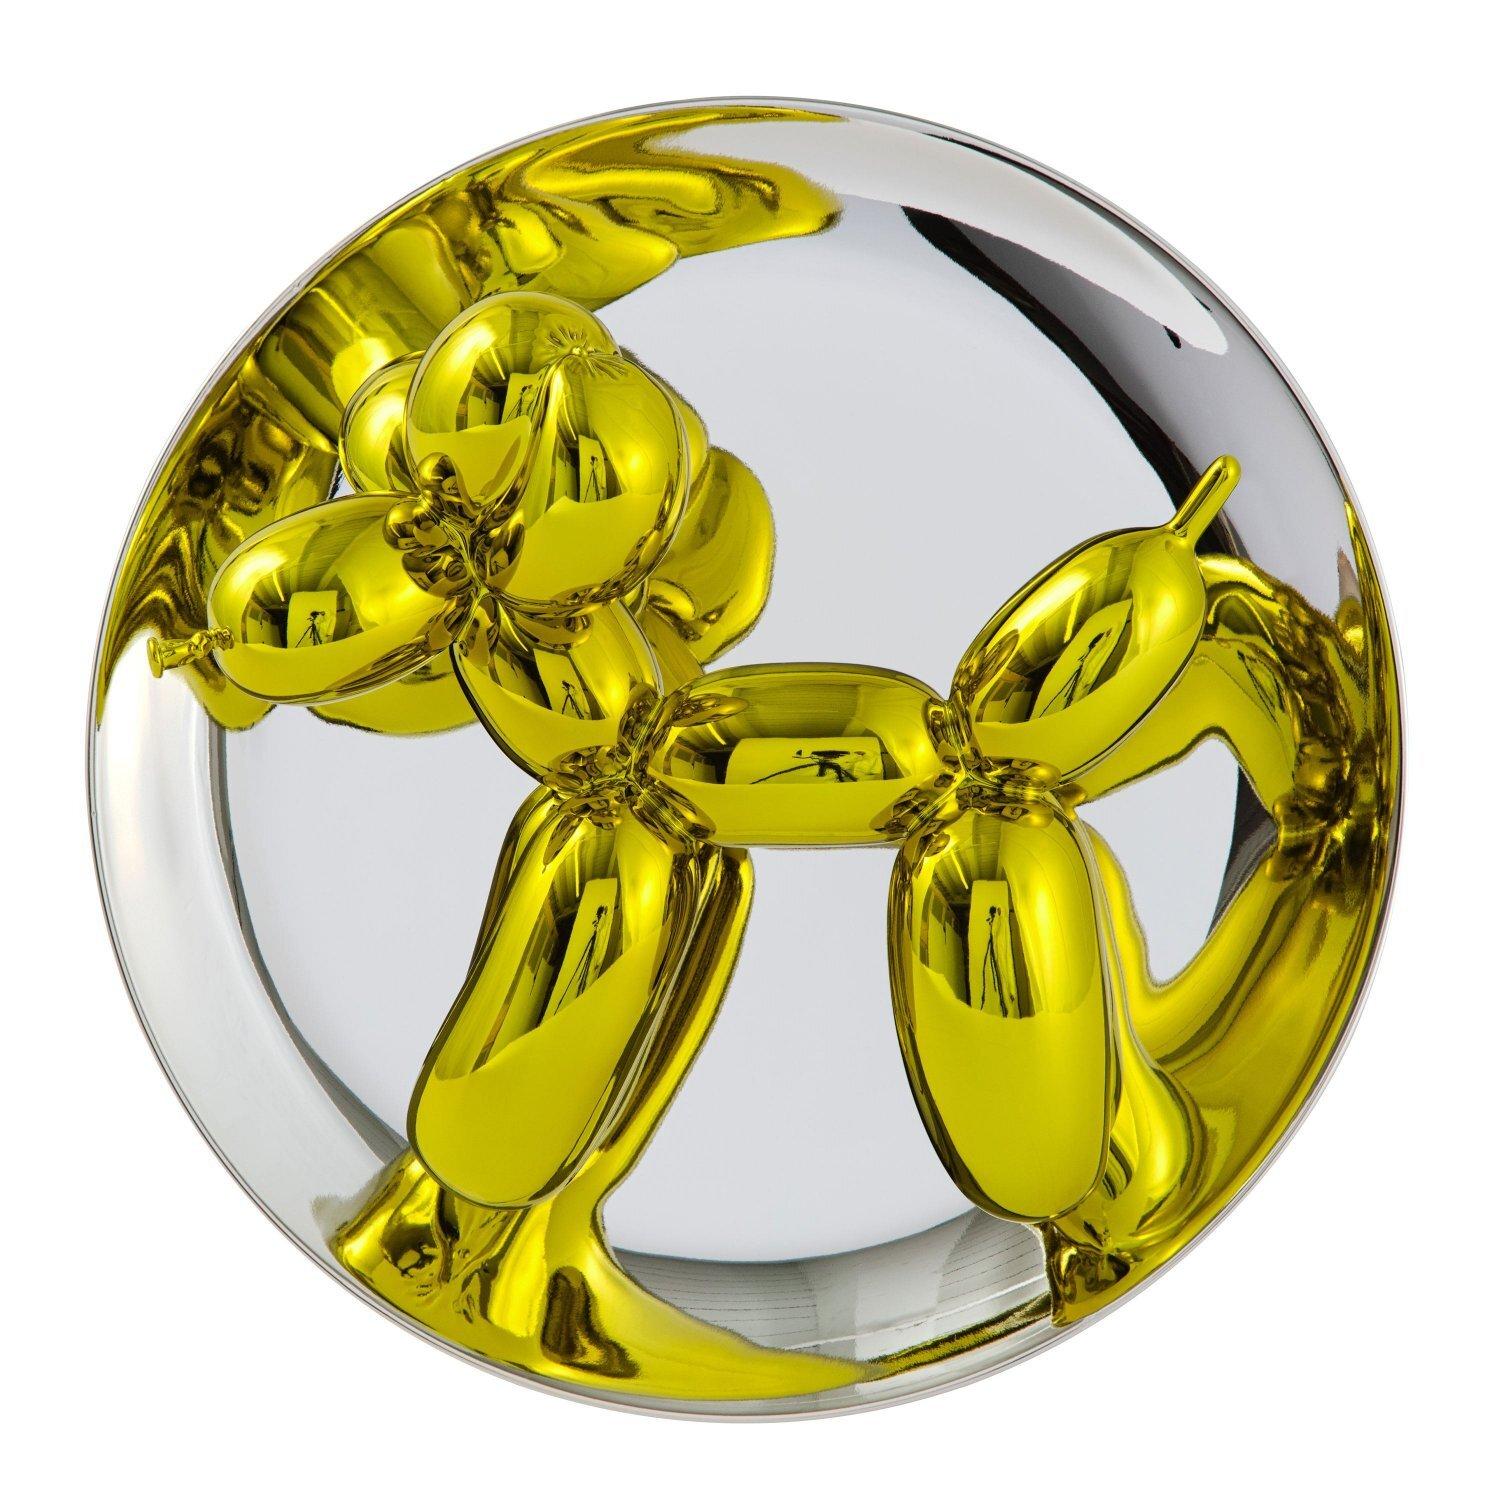 Balloon Dogs Set of 3 (mixed edition numbers) - Jeff Koons, Contemporary, 21st Century, Sculpture, Decor, Limited Edition

Limoges porcelain with chromatic metalized coating
Edition of 2300
Signed and numbered
In mint condition, as acquired from the